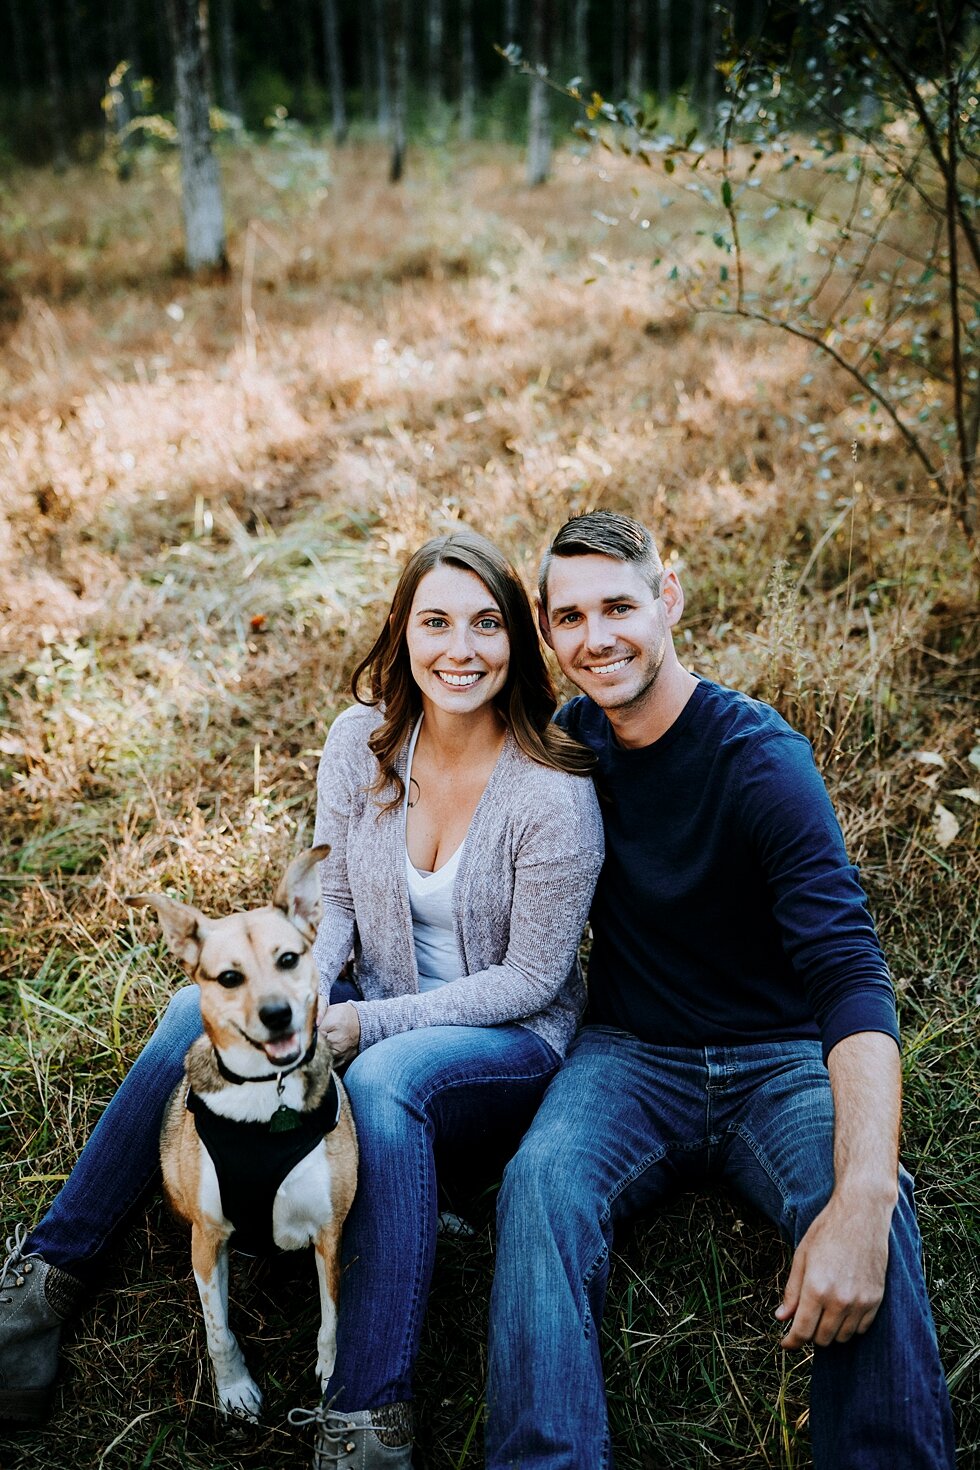  Sometimes an engagement involves more than just the couple. This cute pup joined us as the best man #engagementgoals #engagementphotographer #engaged #outdoorengagement #kentuckyphotographer #indianaphotographer #louisvillephotographer #engagementph